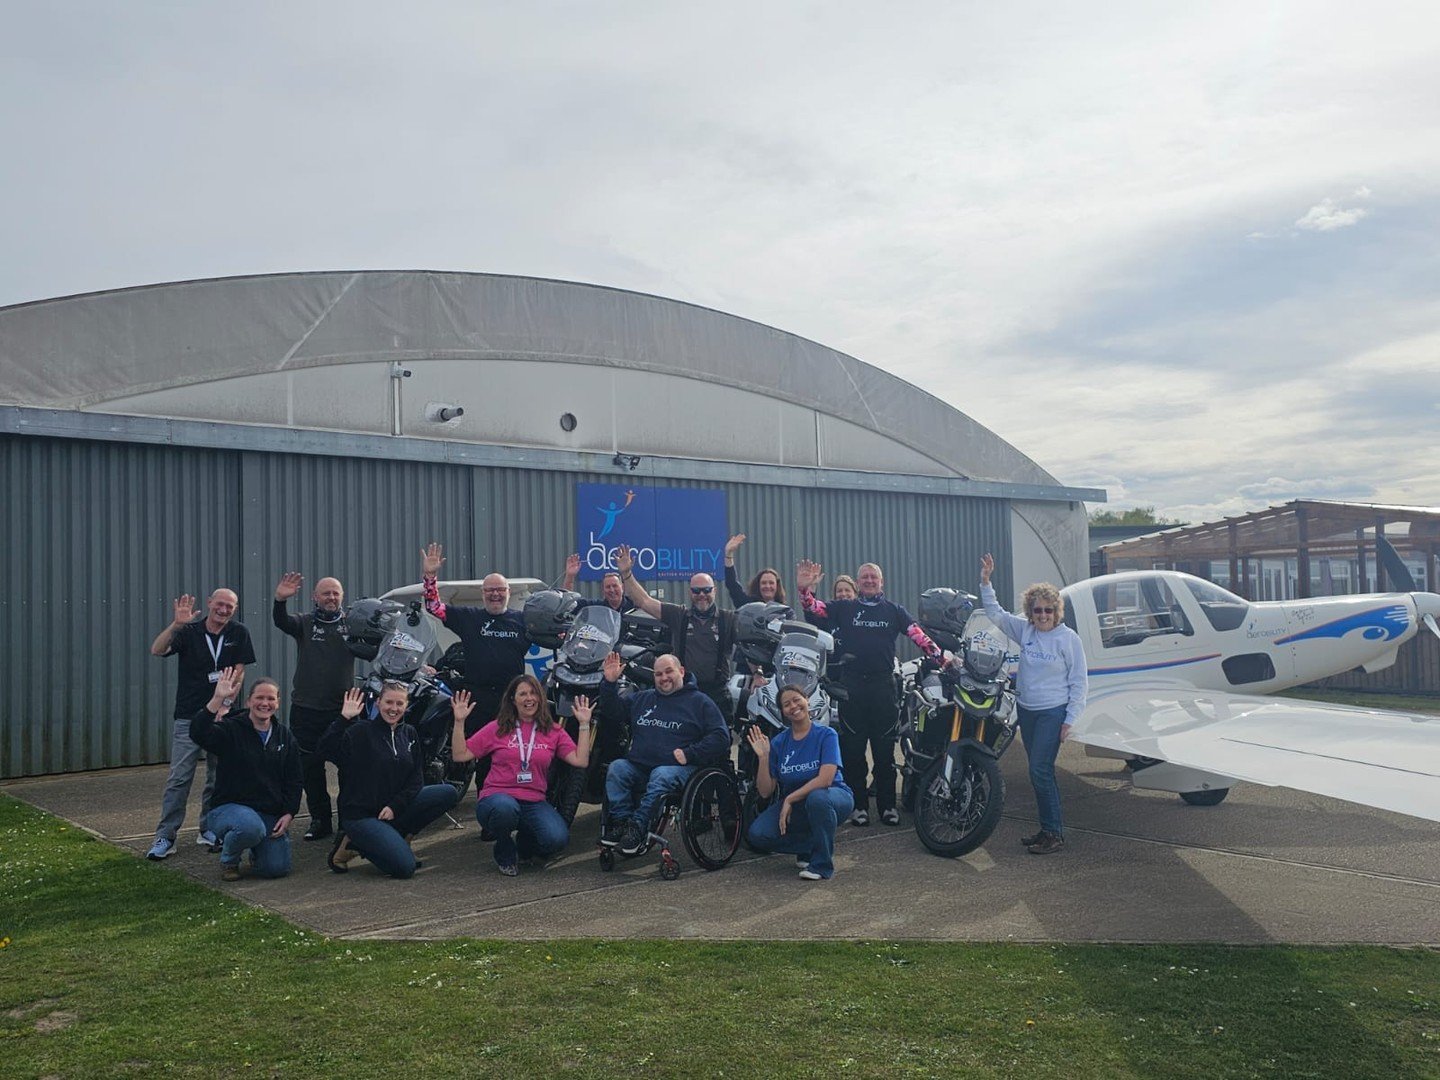 The incredible @thebigtour24in24 riders made a pit stop at Aerobility today! 

Wayne, Richard, Shaun, and Harvey are on a mission to ride 3000 miles from Aberdeen to Gibraltar, visiting all 24 NATS and NATS Solutions Air Traffic Control Units, all in